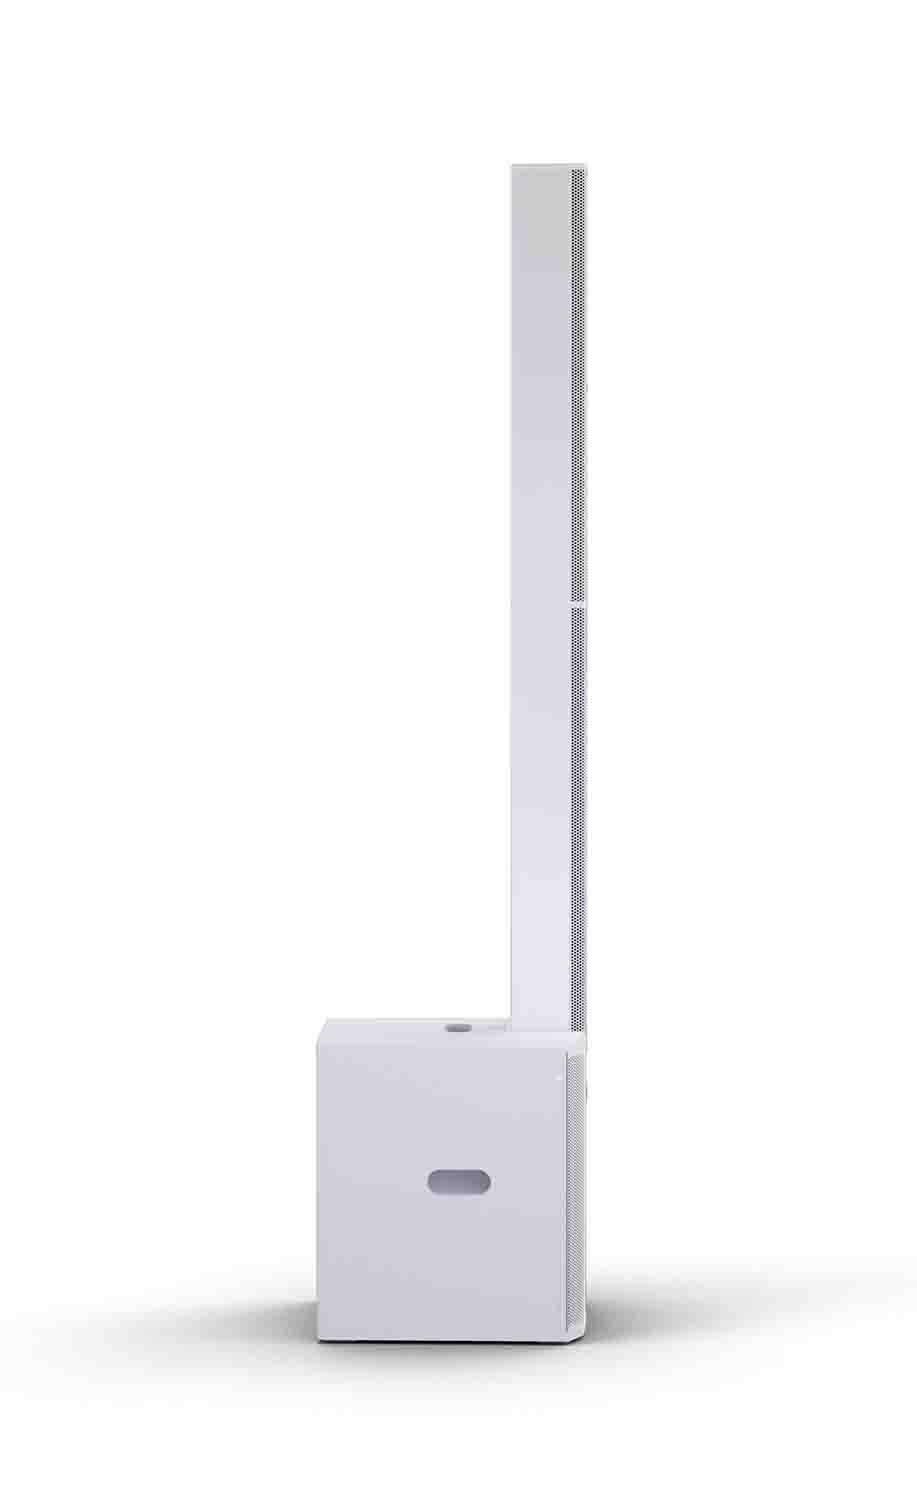 B-Stock: LD System MAUI 28 G3 W, Compact Cardioid Powered Column PA System - White LD Systems